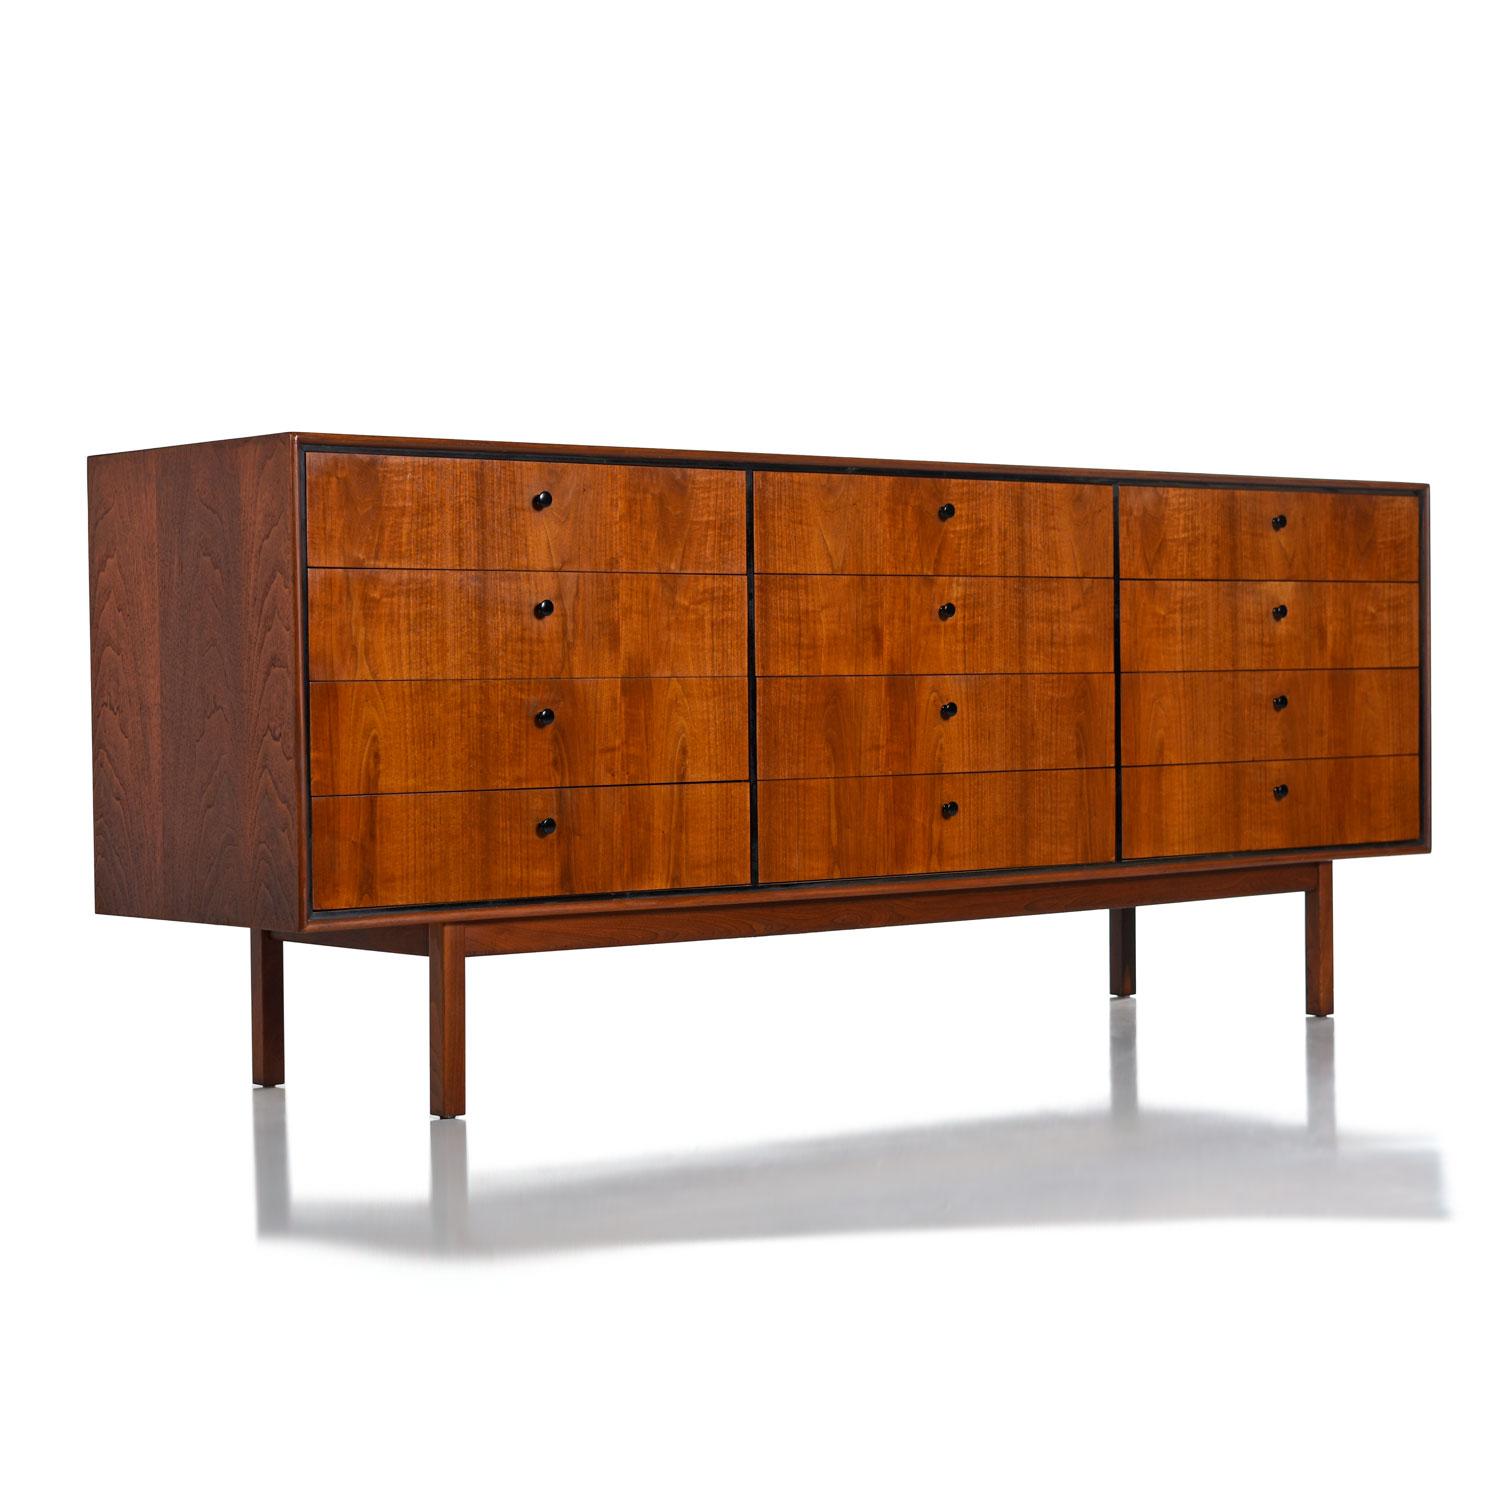 Mid-Century Modern walnut dresser. Manufactured by Founders Furniture and designed by Jack Cartwright, circa 1960s. Sleek, elegant, minimalist design made with the finest quality materials. Crafted with a mix of old growth, solid walnut, solid